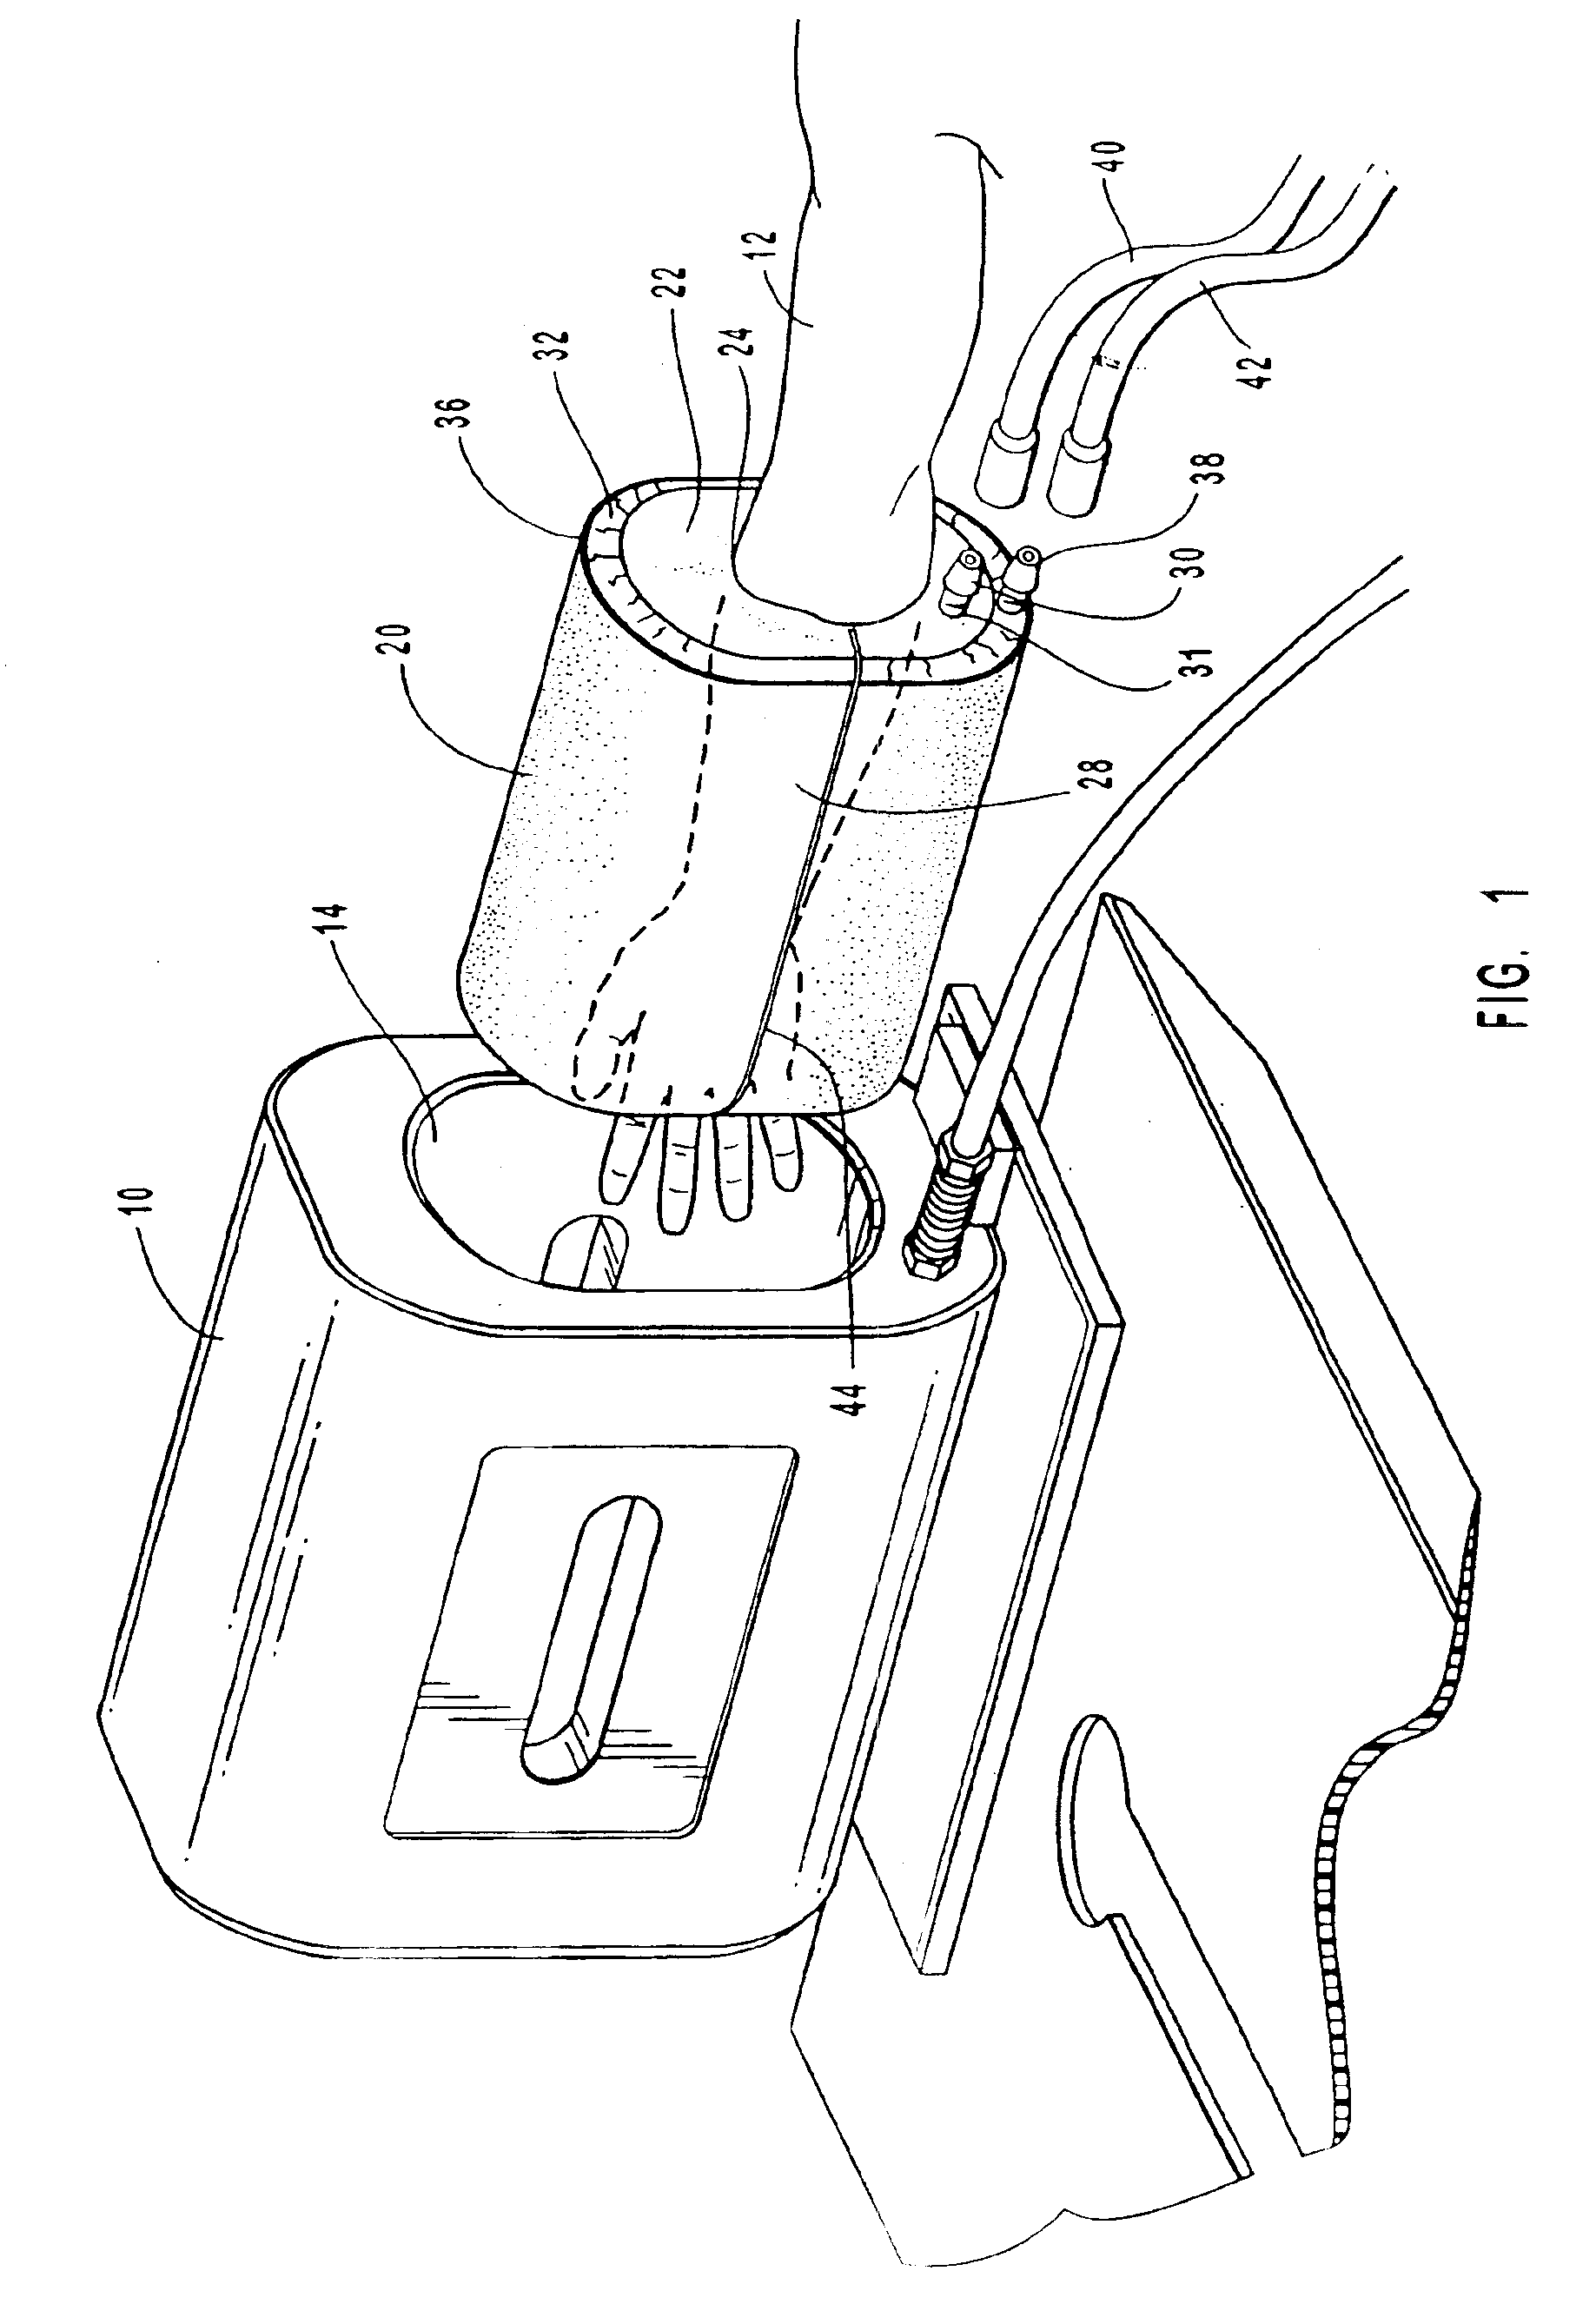 Restraining apparatus and method for use in imaging procedures